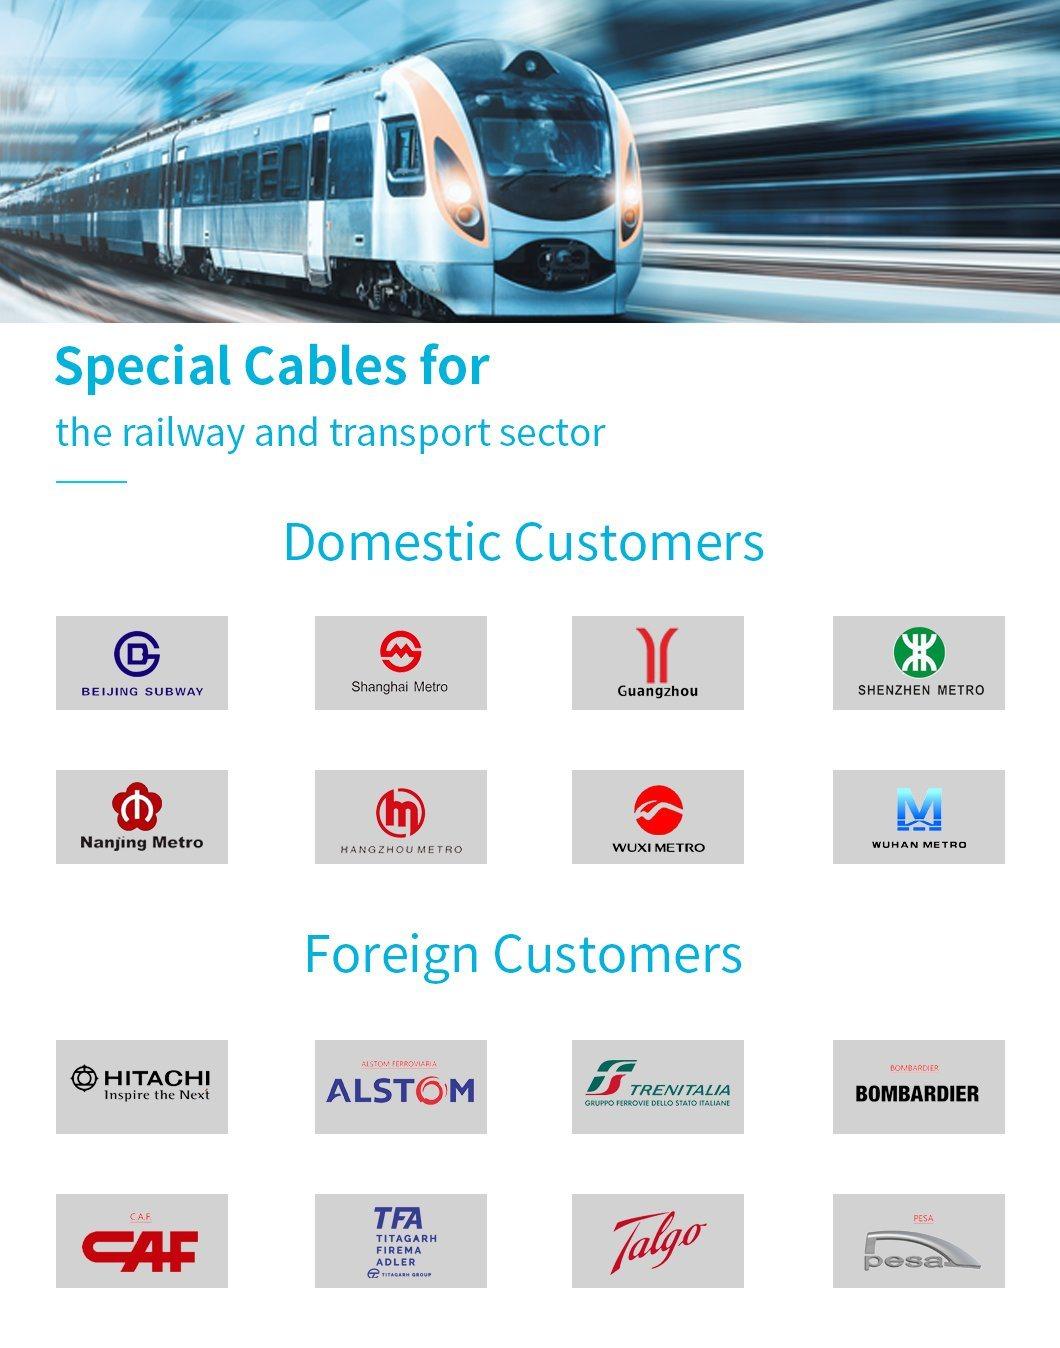 Tinned Wire Copper Electrical Bus Cable with CE Certification for Rail Vehicles